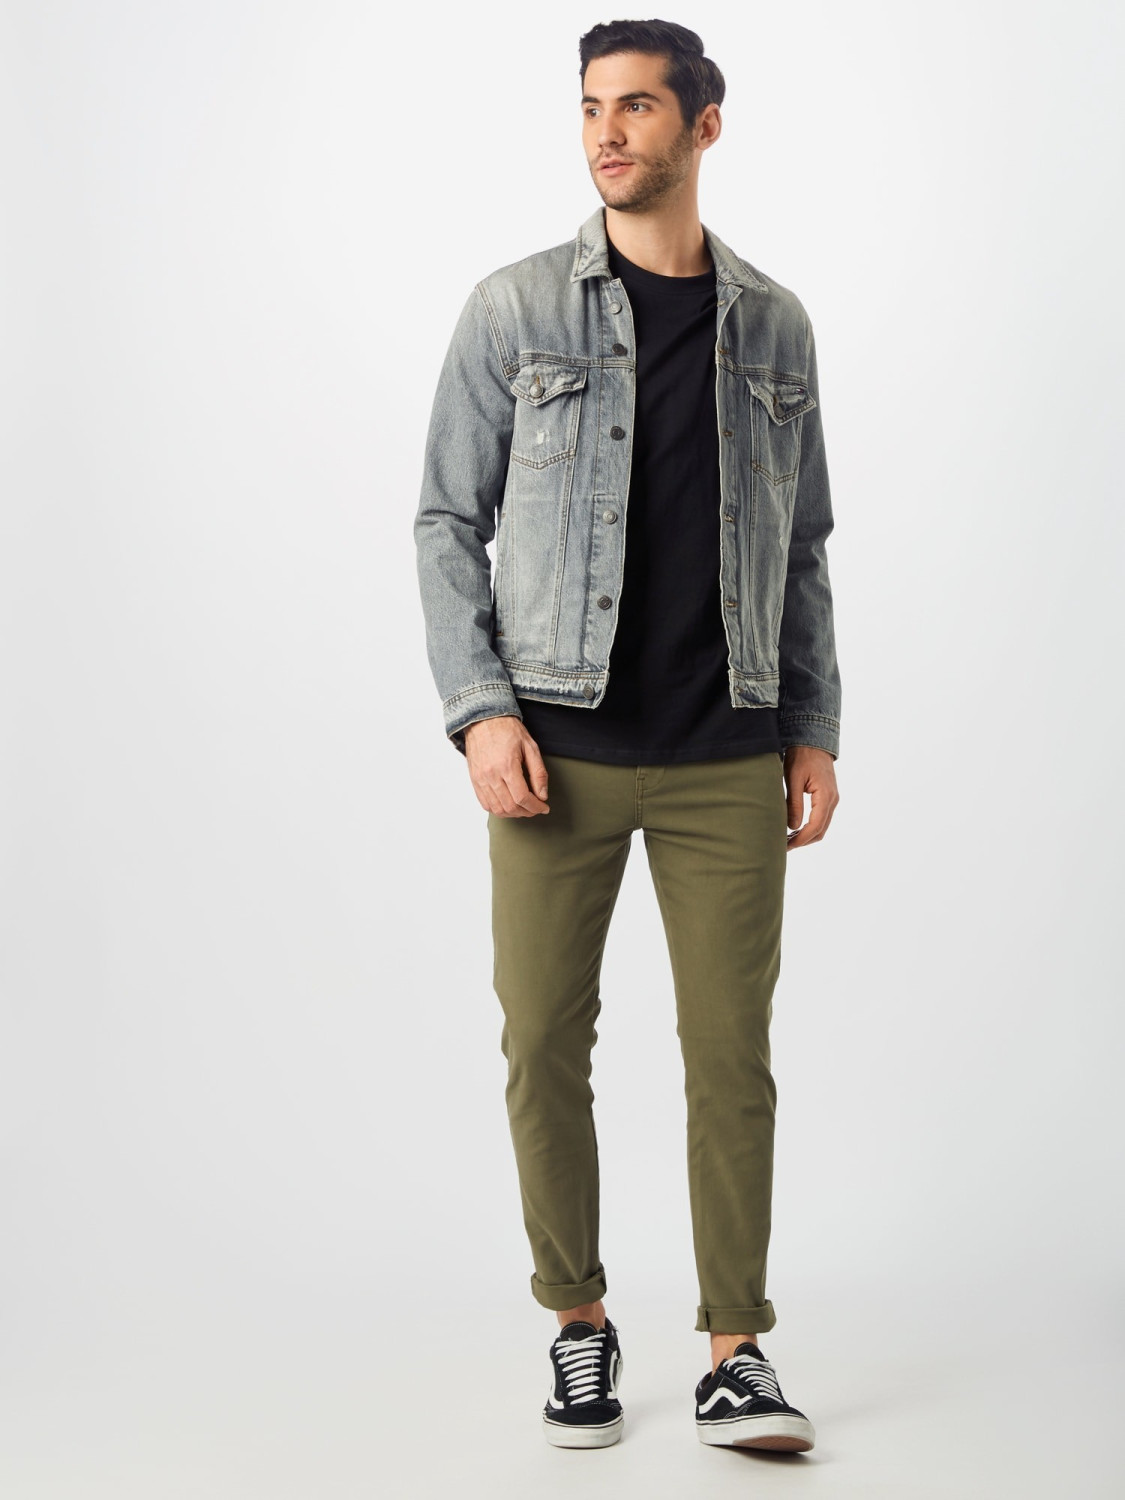 Buy Levi's xx Chino Slim Taper Fit Pants olive night from £44.99 (Today ...